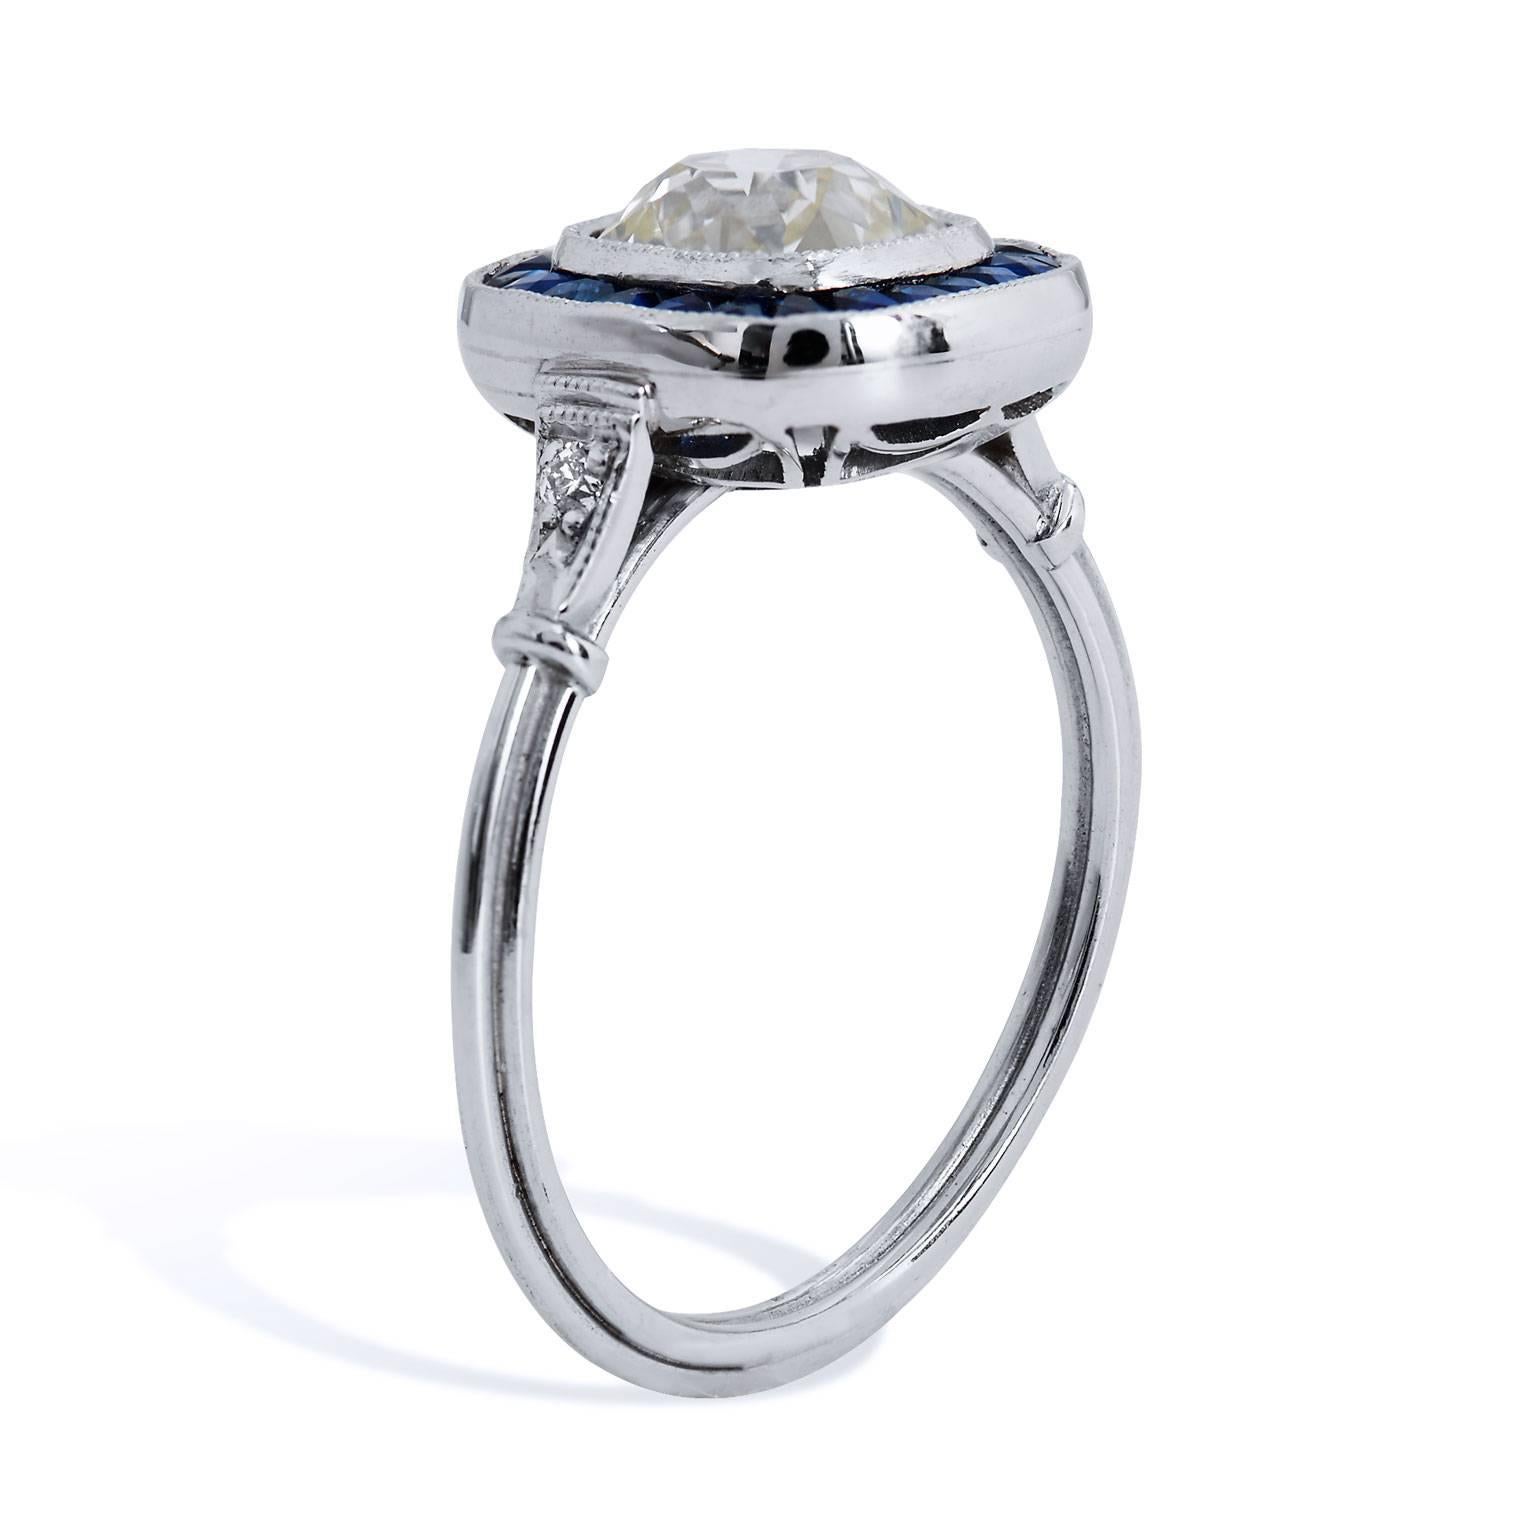 Crafted in platinum, this ring features a 1.44 carat N/O/VS2/SI1 graded Old Mine cut center diamond surrounded by 0.70 carat of french cut sapphires. The ring features a thin shank for a very soft and feminine feel that is set with 0.05 carat of